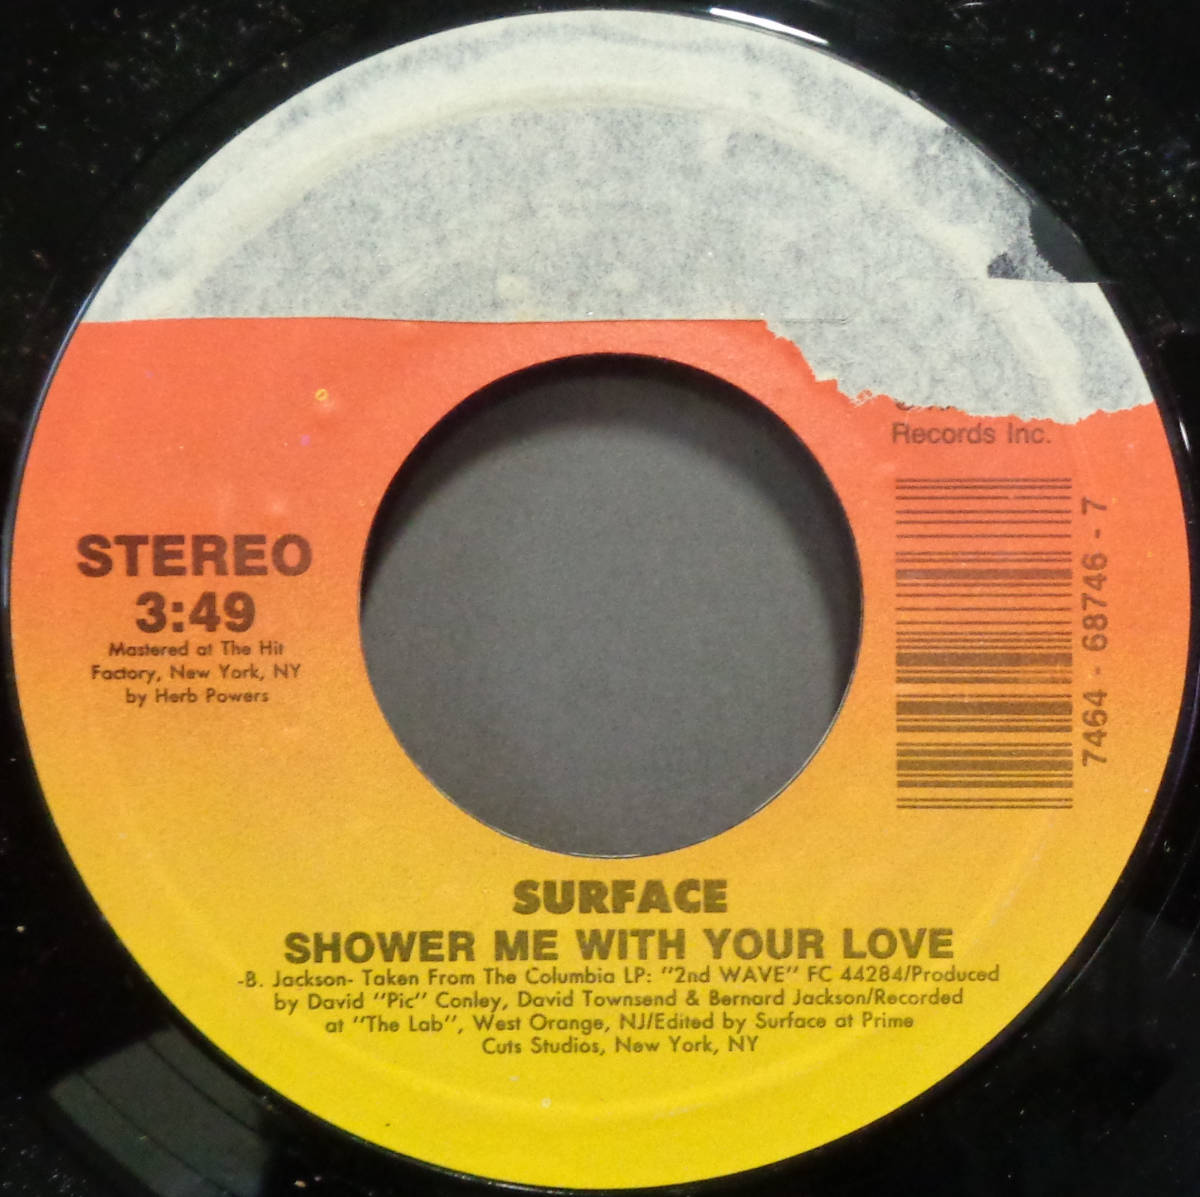 【SOUL 45】SURFACE - SHOWER ME WITH YOUR LOVE / (INSTR.) (s231111021) _画像1